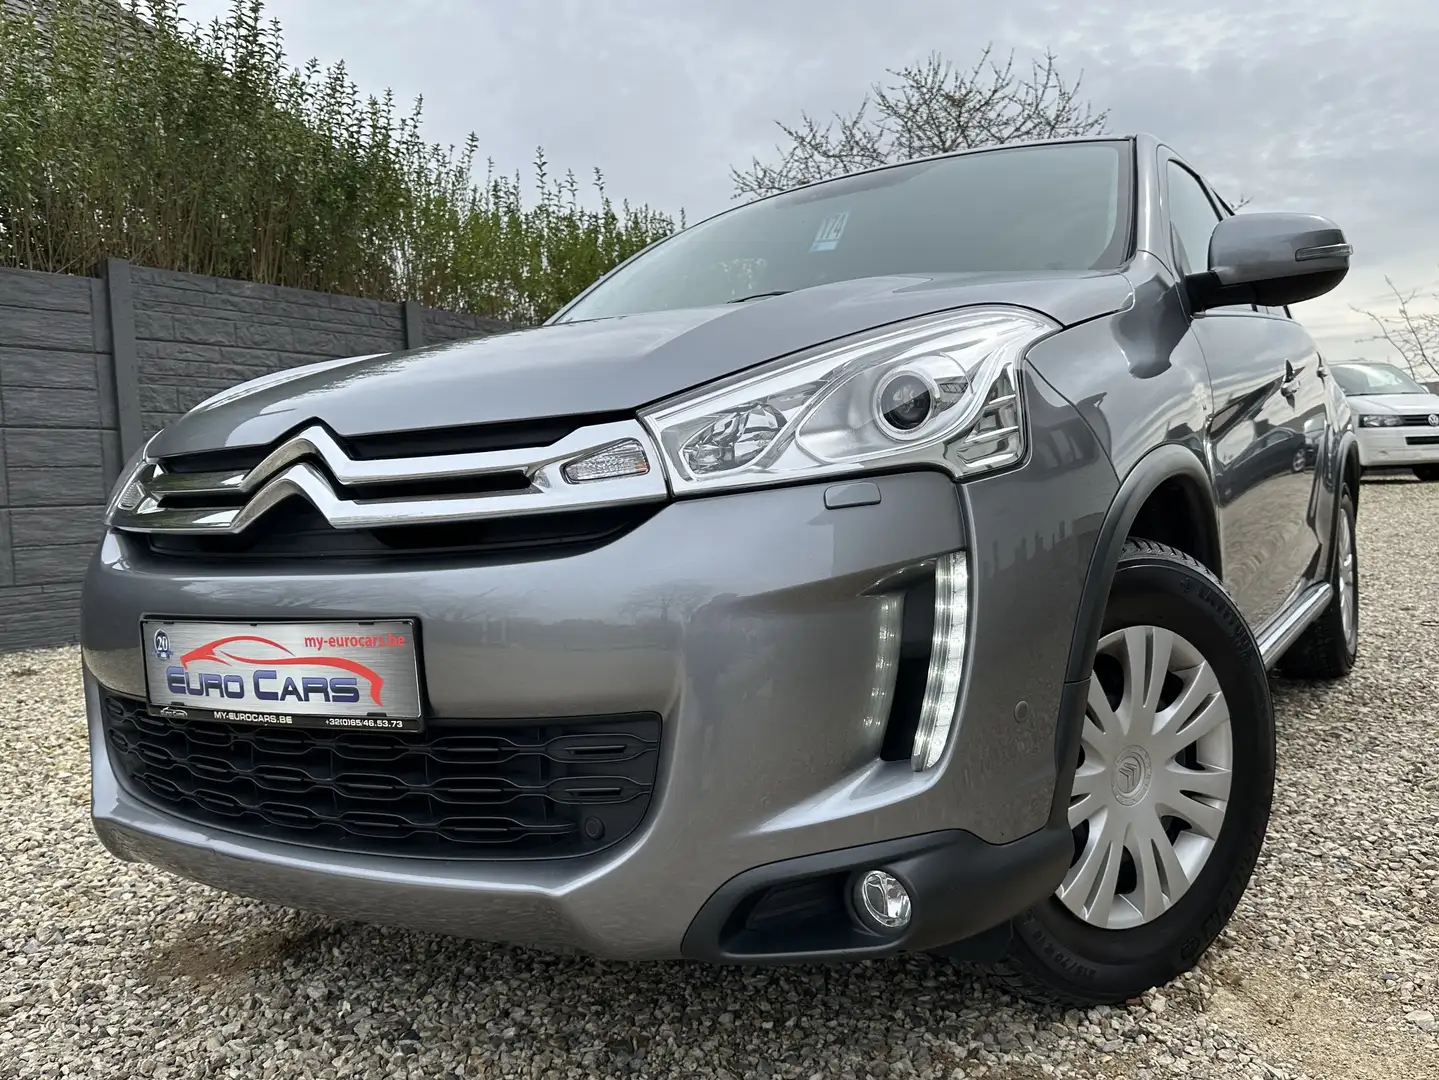 Citroen C4 Aircross 1.6i 2WD Exclusive CUIR/XENON/LED/CRUISE/PDC/ siva - 1